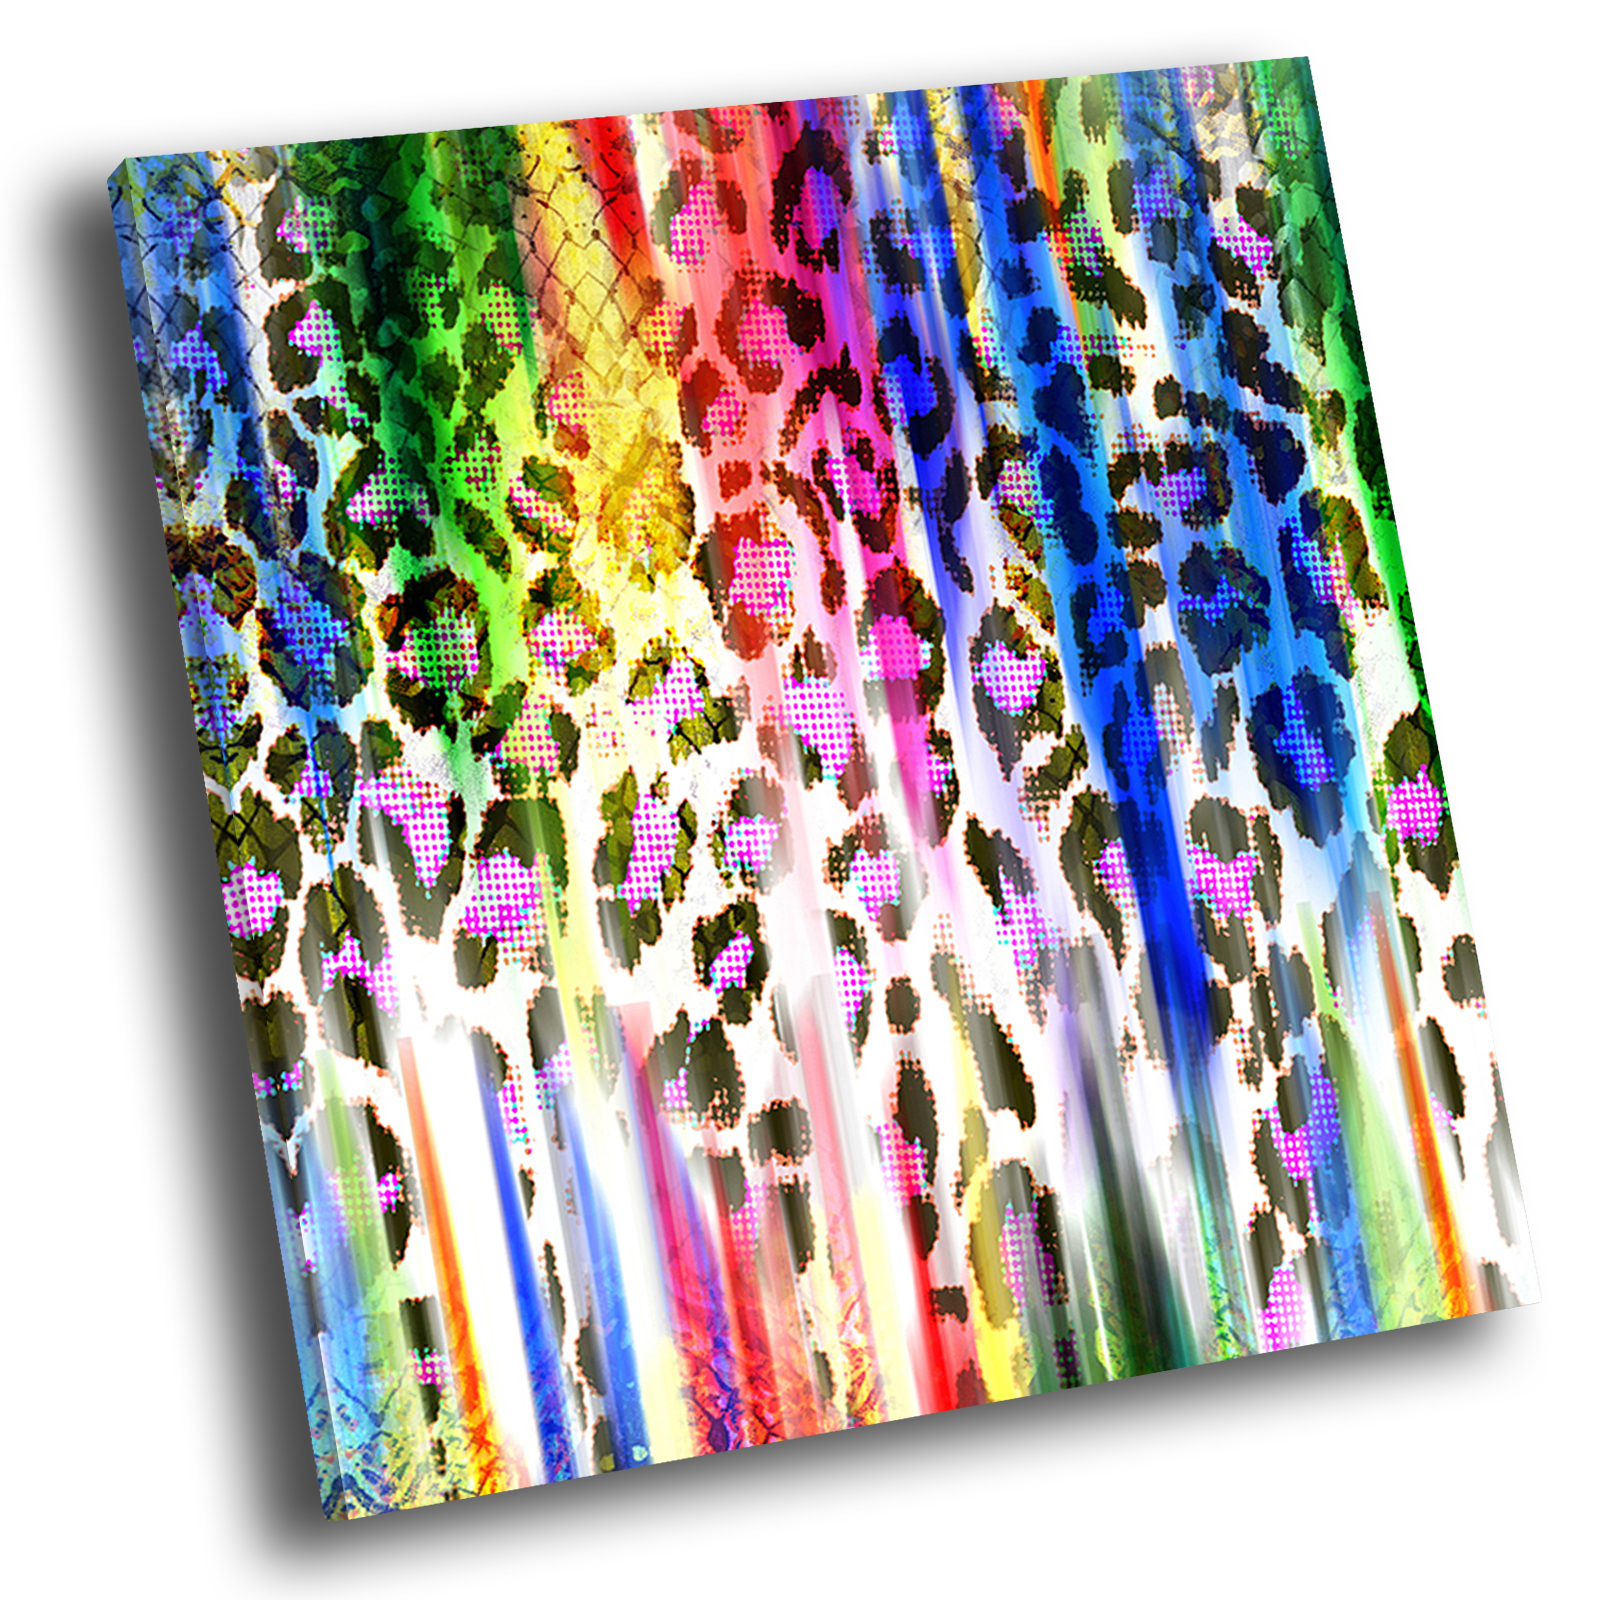 AB1008 Colourful Leopard Modern Abstract Framed Wall Art Large Picture Prints 